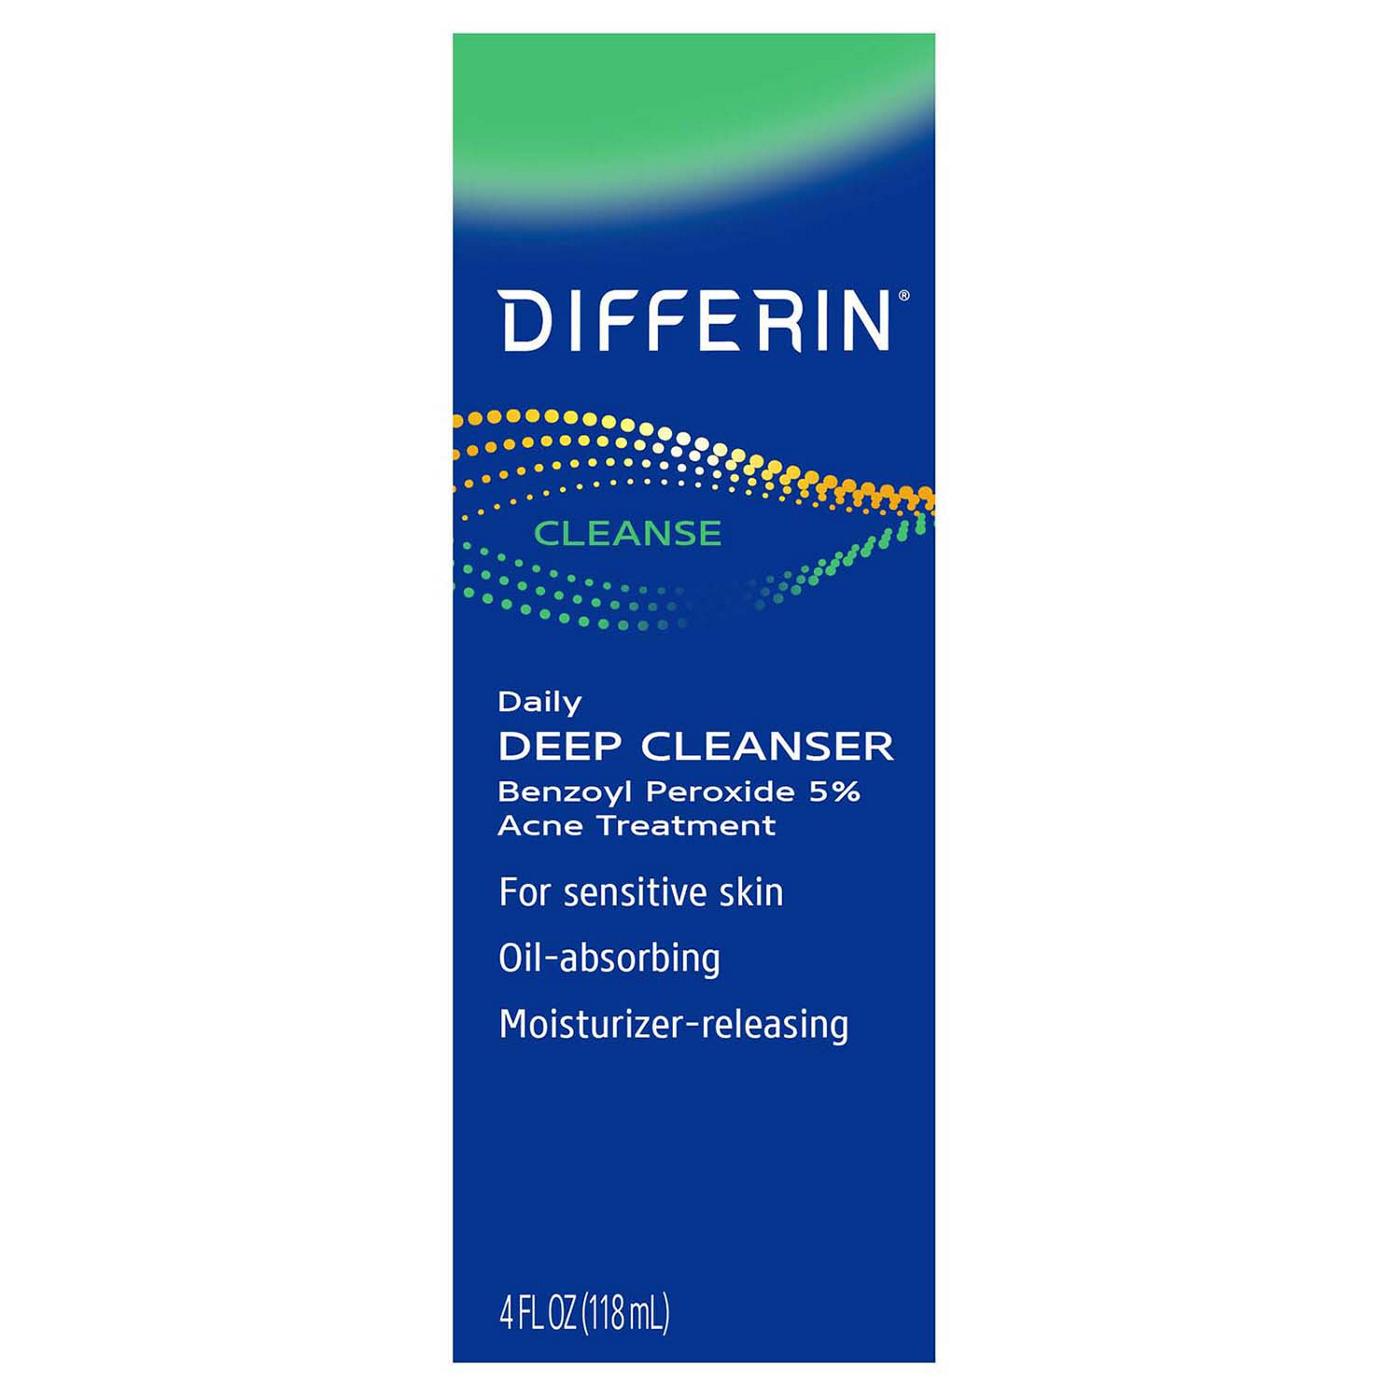 Differin Daily Deep Cleanser; image 1 of 8